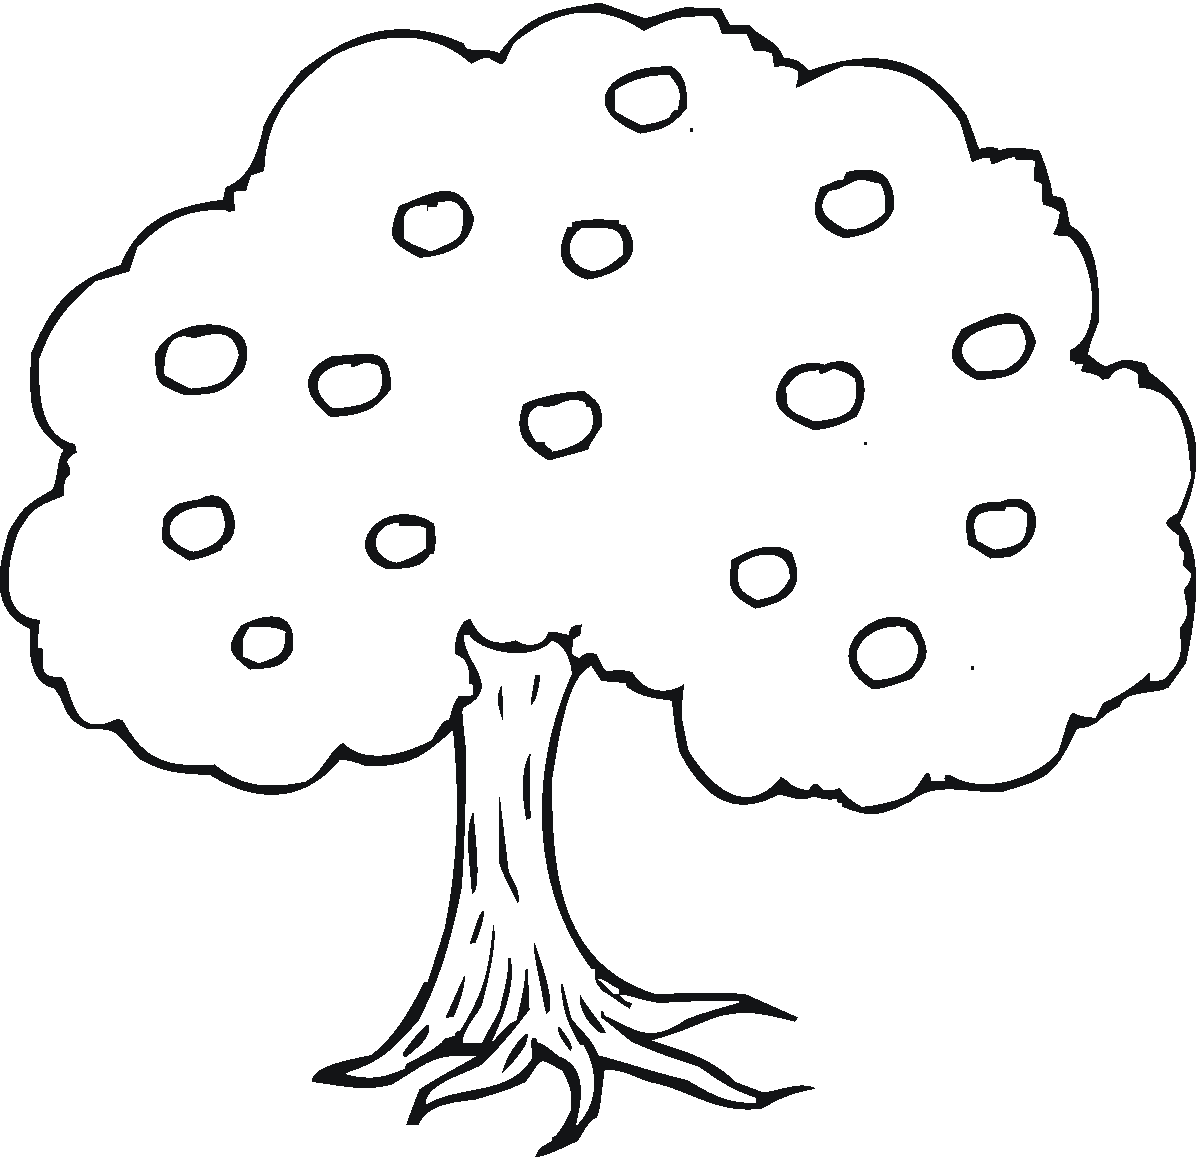 Apple trees clipart black and white